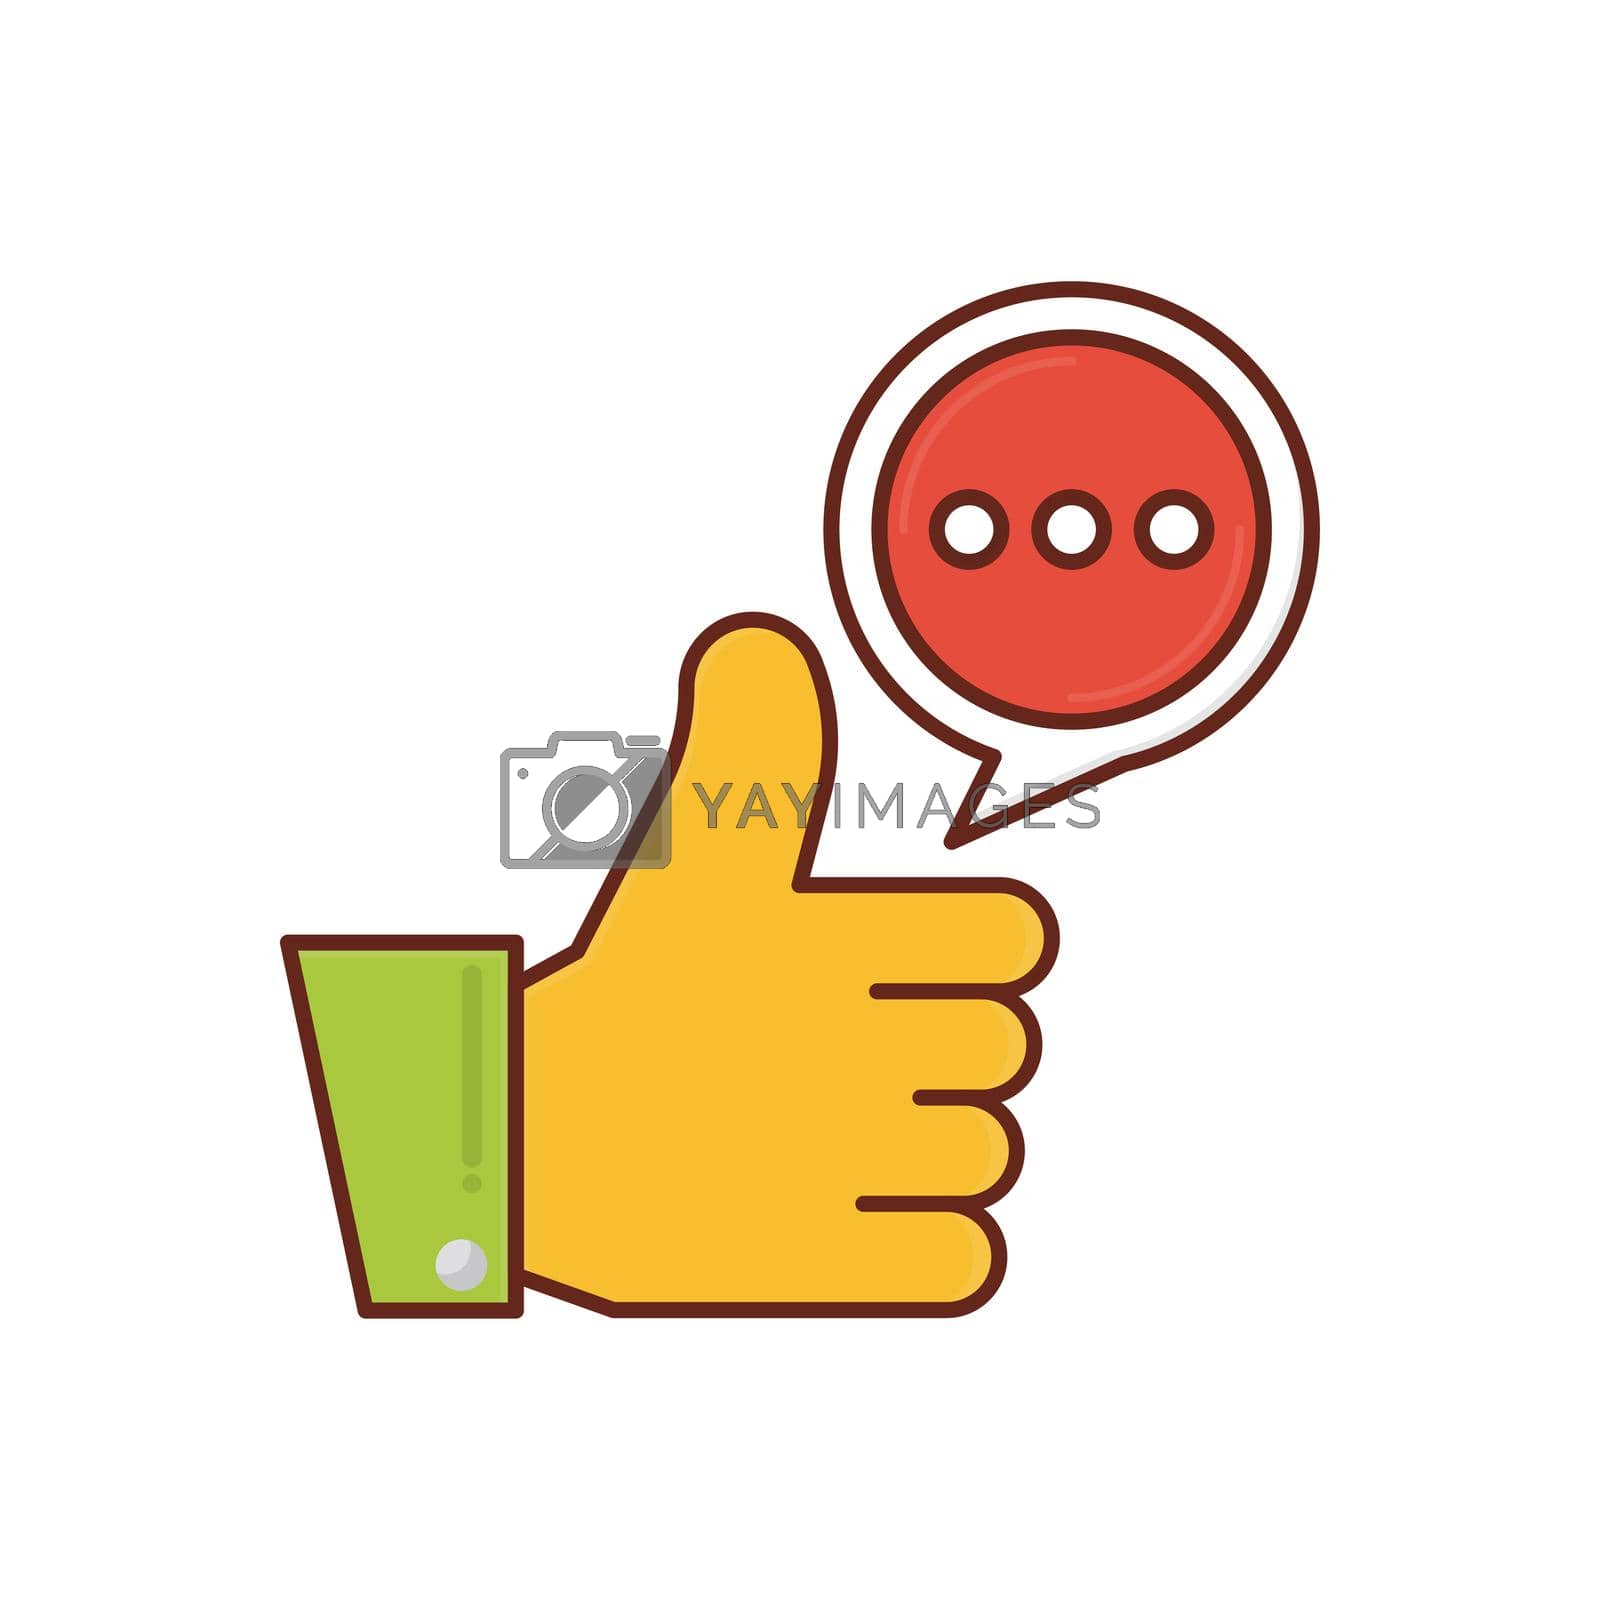 Royalty free image of review by FlaticonsDesign